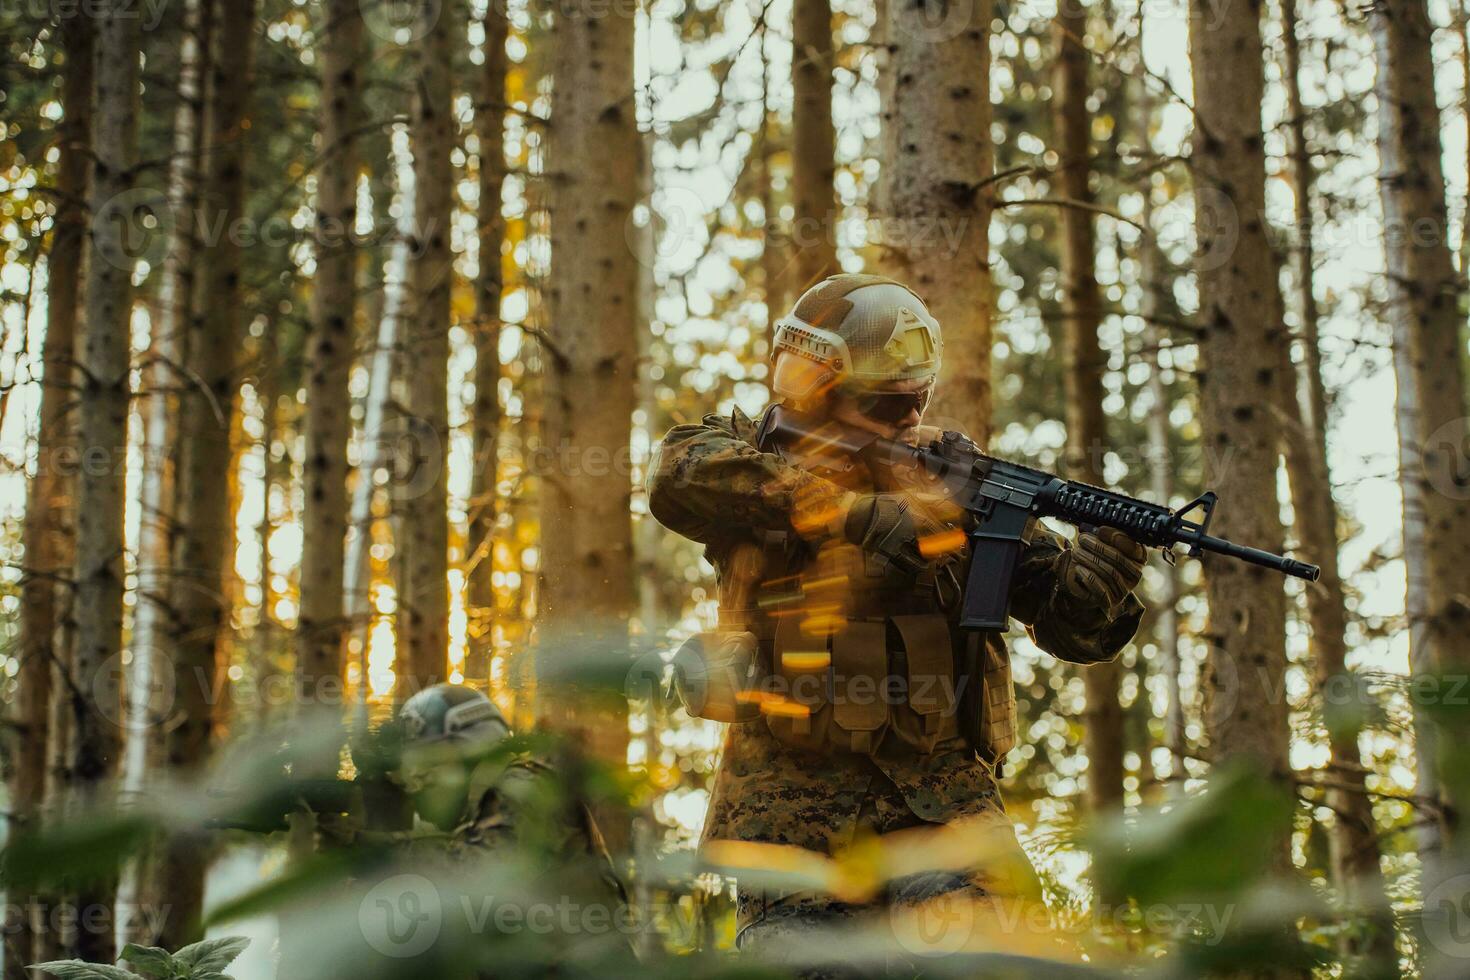 A modern warfare soldier on war duty in dense and dangerous forest areas. Dangerous military rescue operations photo